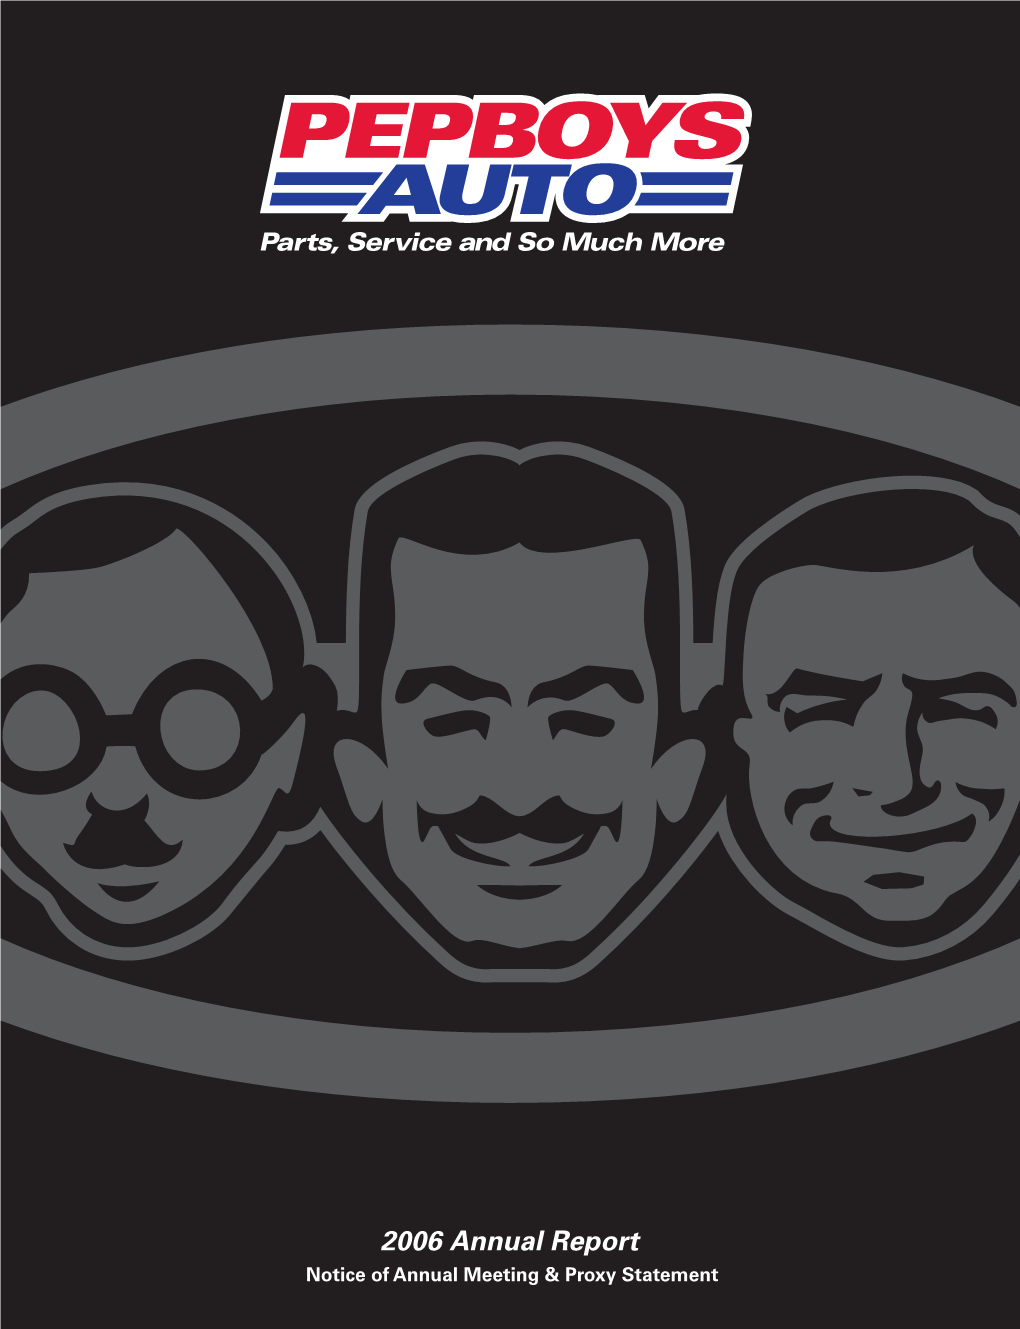 THE PEP BOYS – MANNY, MOE & JACK 3111 West Allegheny Avenue